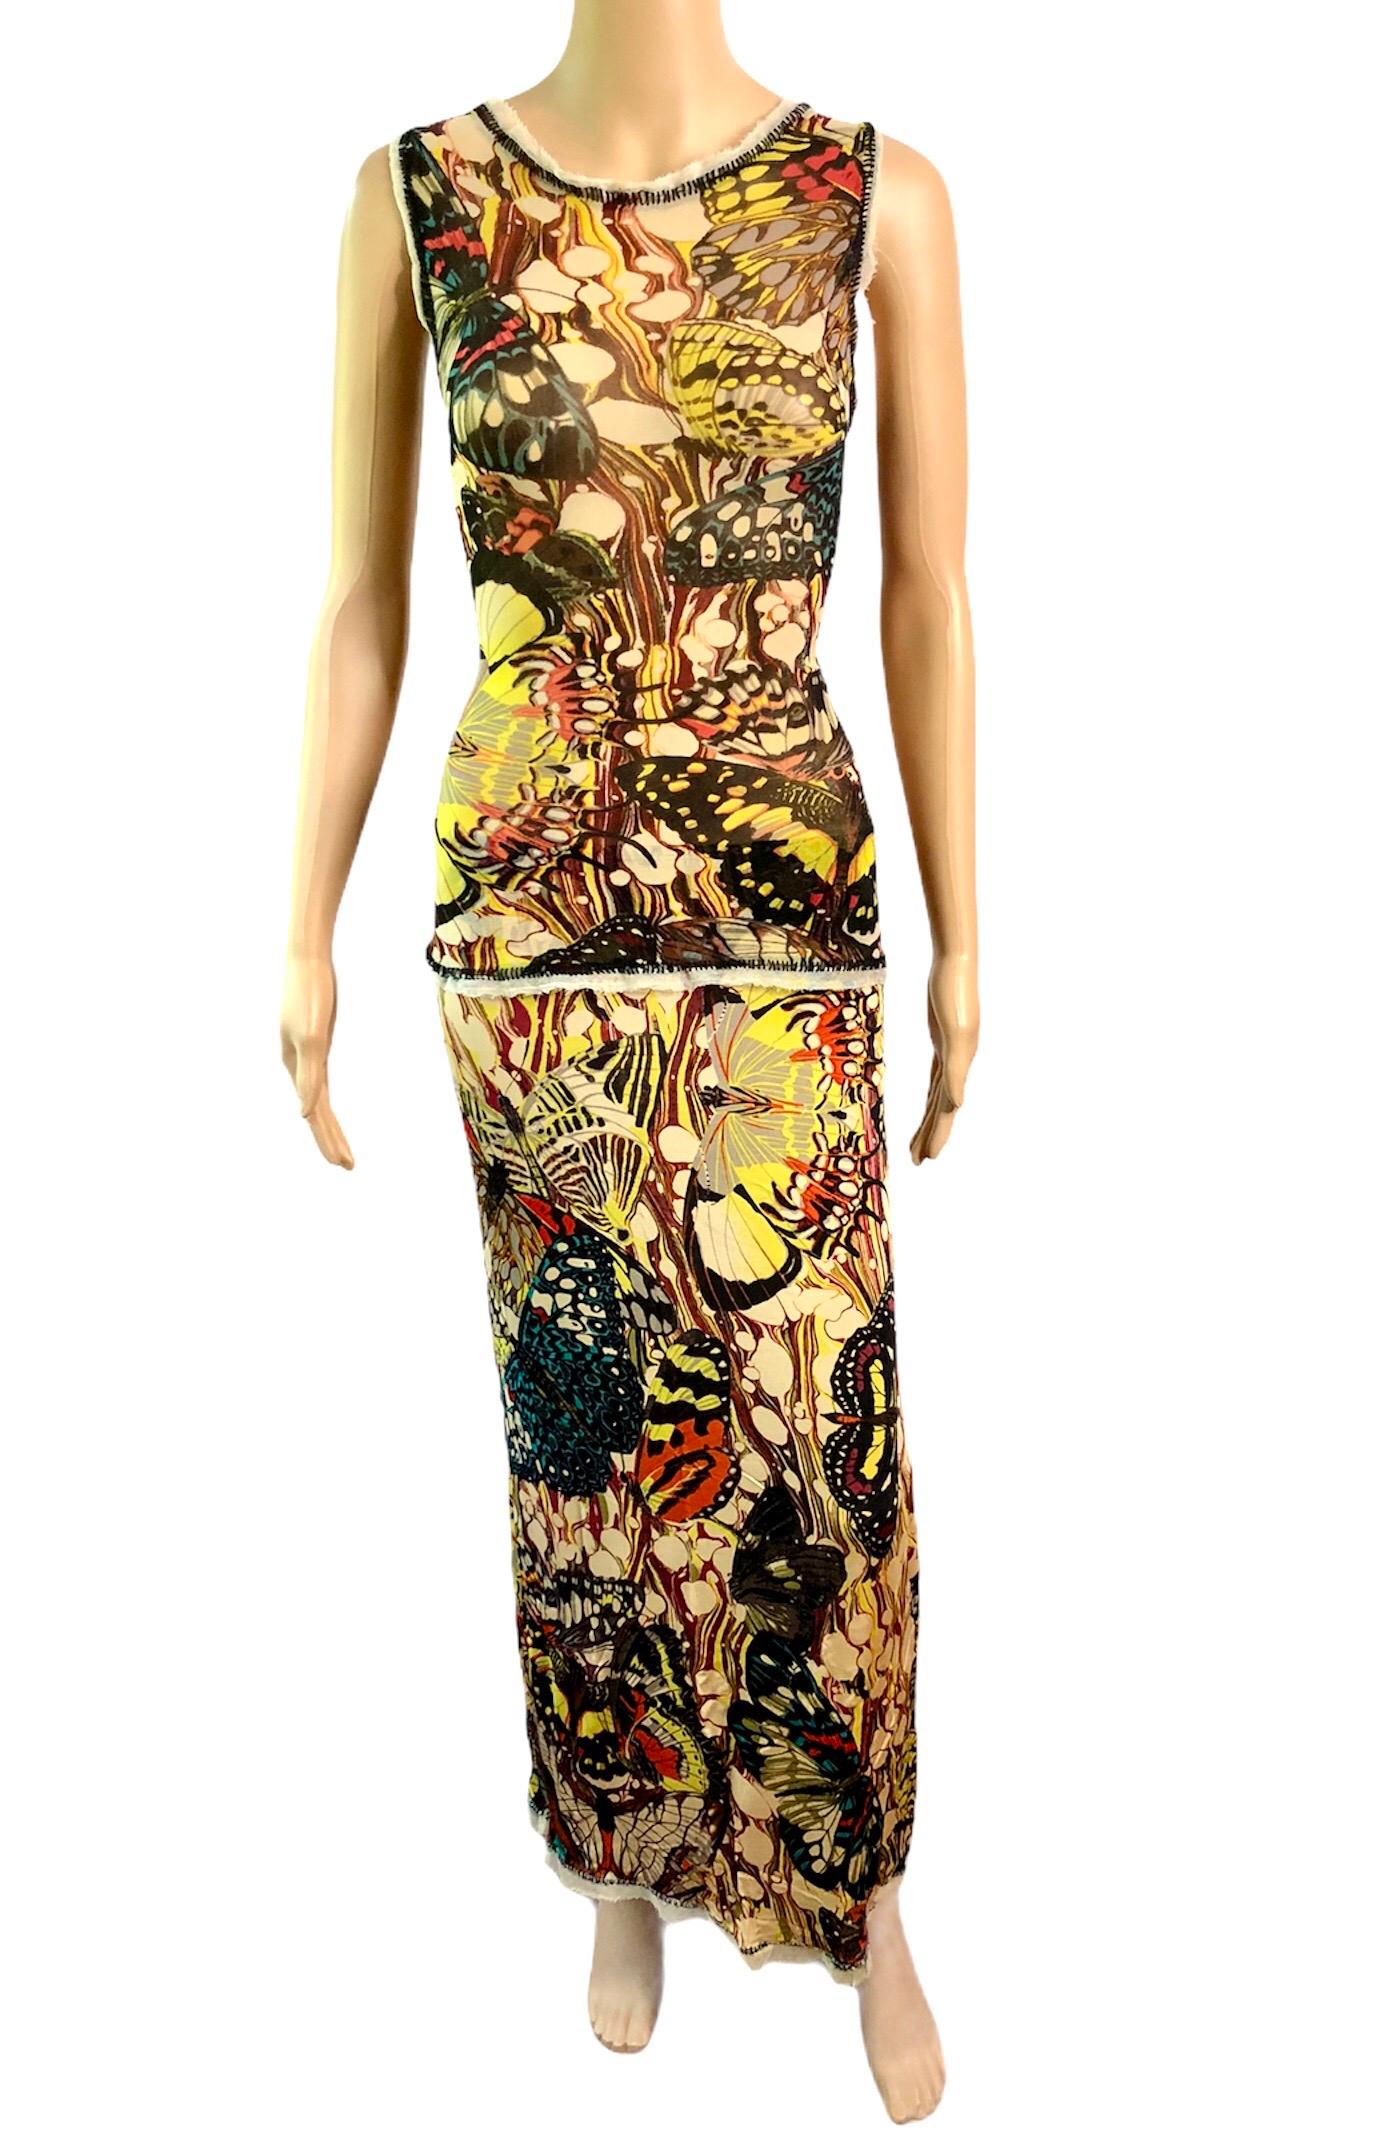 Jean Paul Gaultier S/S 2003 Vintage Butterfly Print Lace-Up Top & Maxi Skirt Ensemble 2 Piece Set Size S

Please note size tag has been removed from the top. The skirt is size S.


